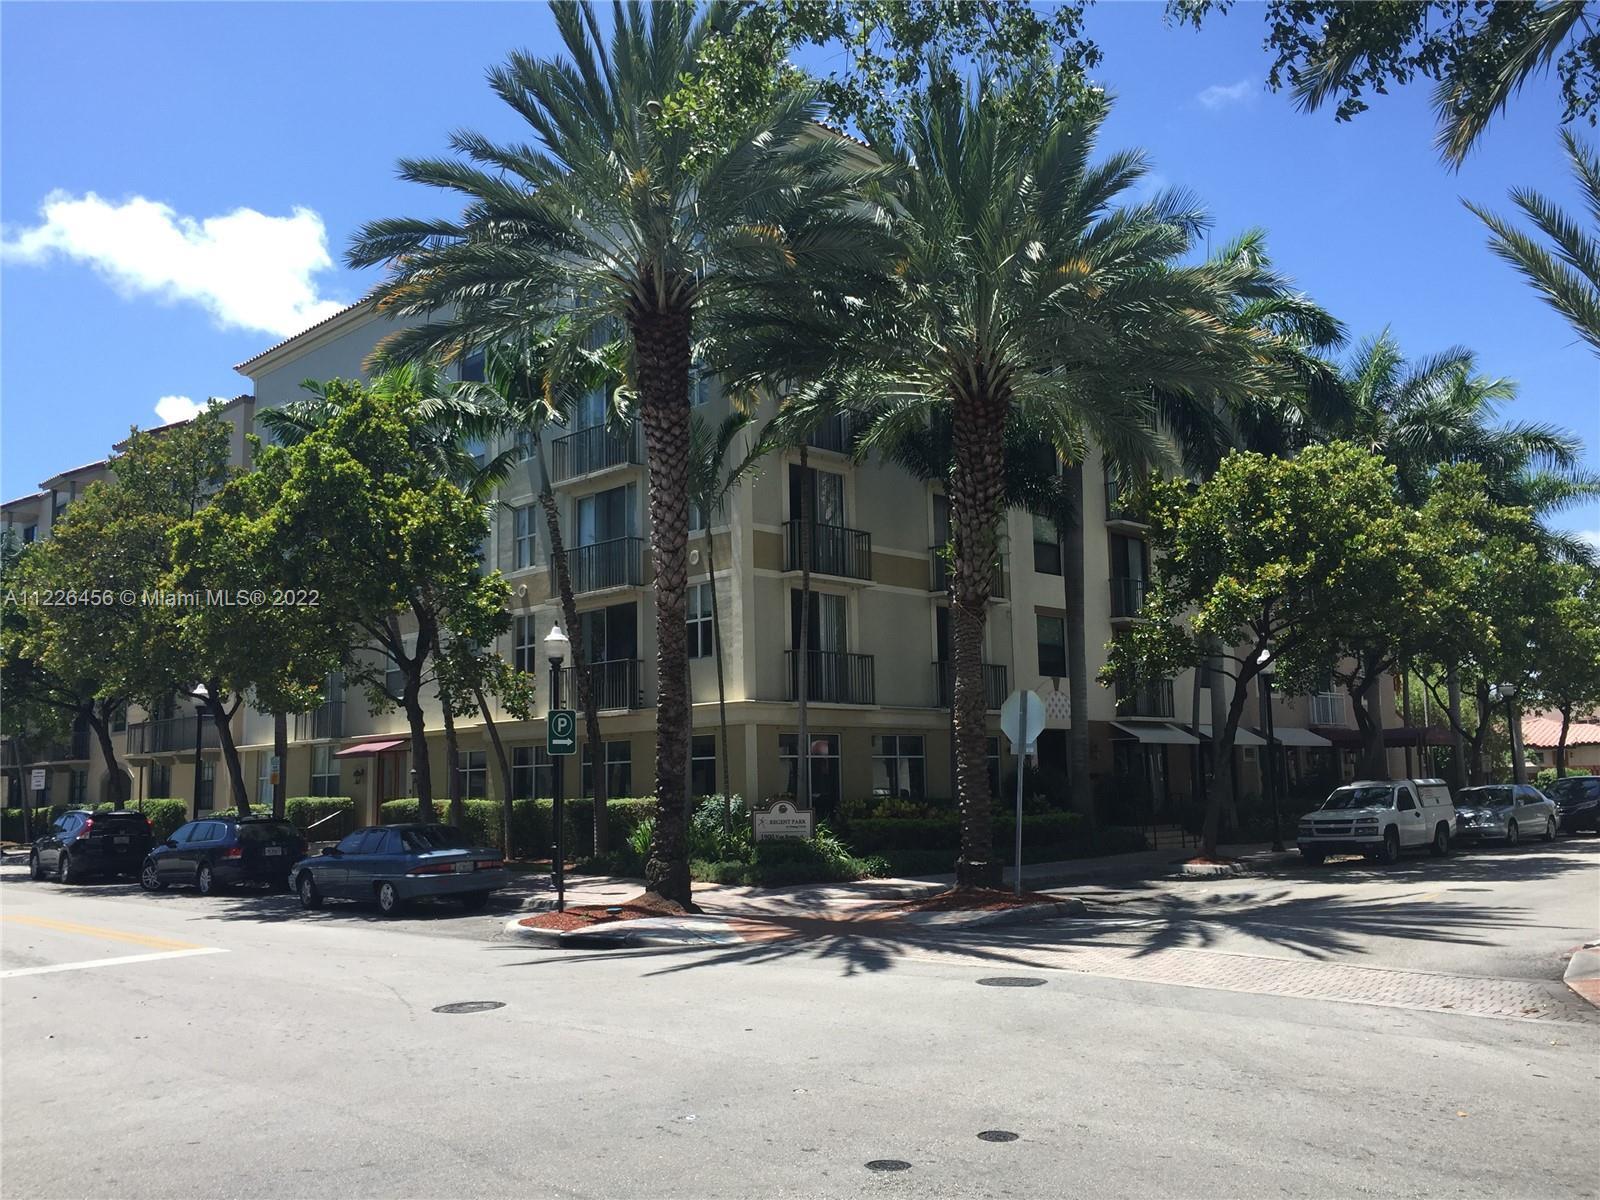 SPACIOUS 2 BEDROOM 2 BATH CONDO OVERLOOKING THE POOL. LOCATED IN THE DOWNTOWN HOLLYWOOD AREA. MANY A